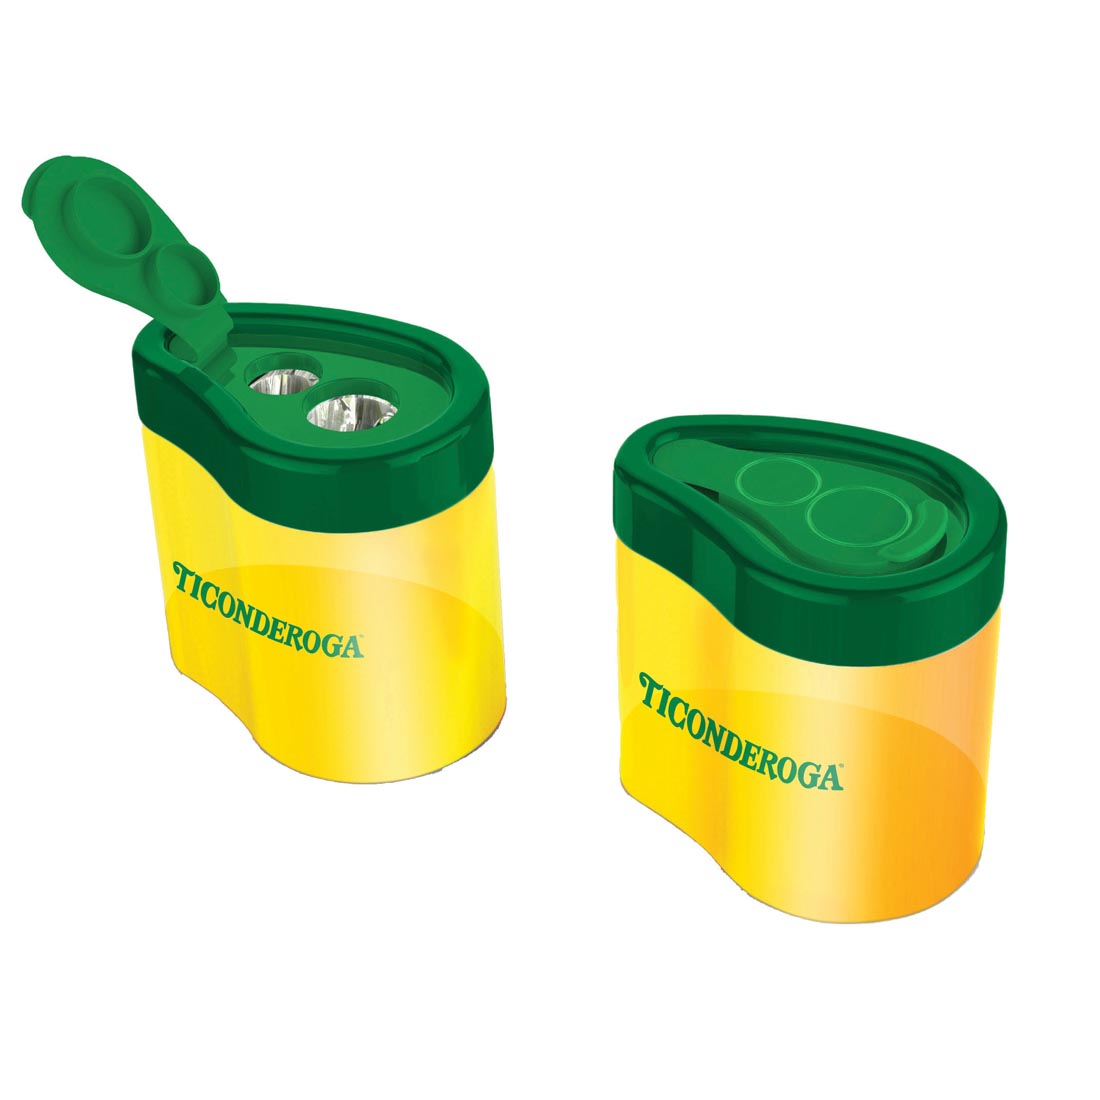 Ticonderoga 2-Hole Pencil Sharpener with lid both open and closed